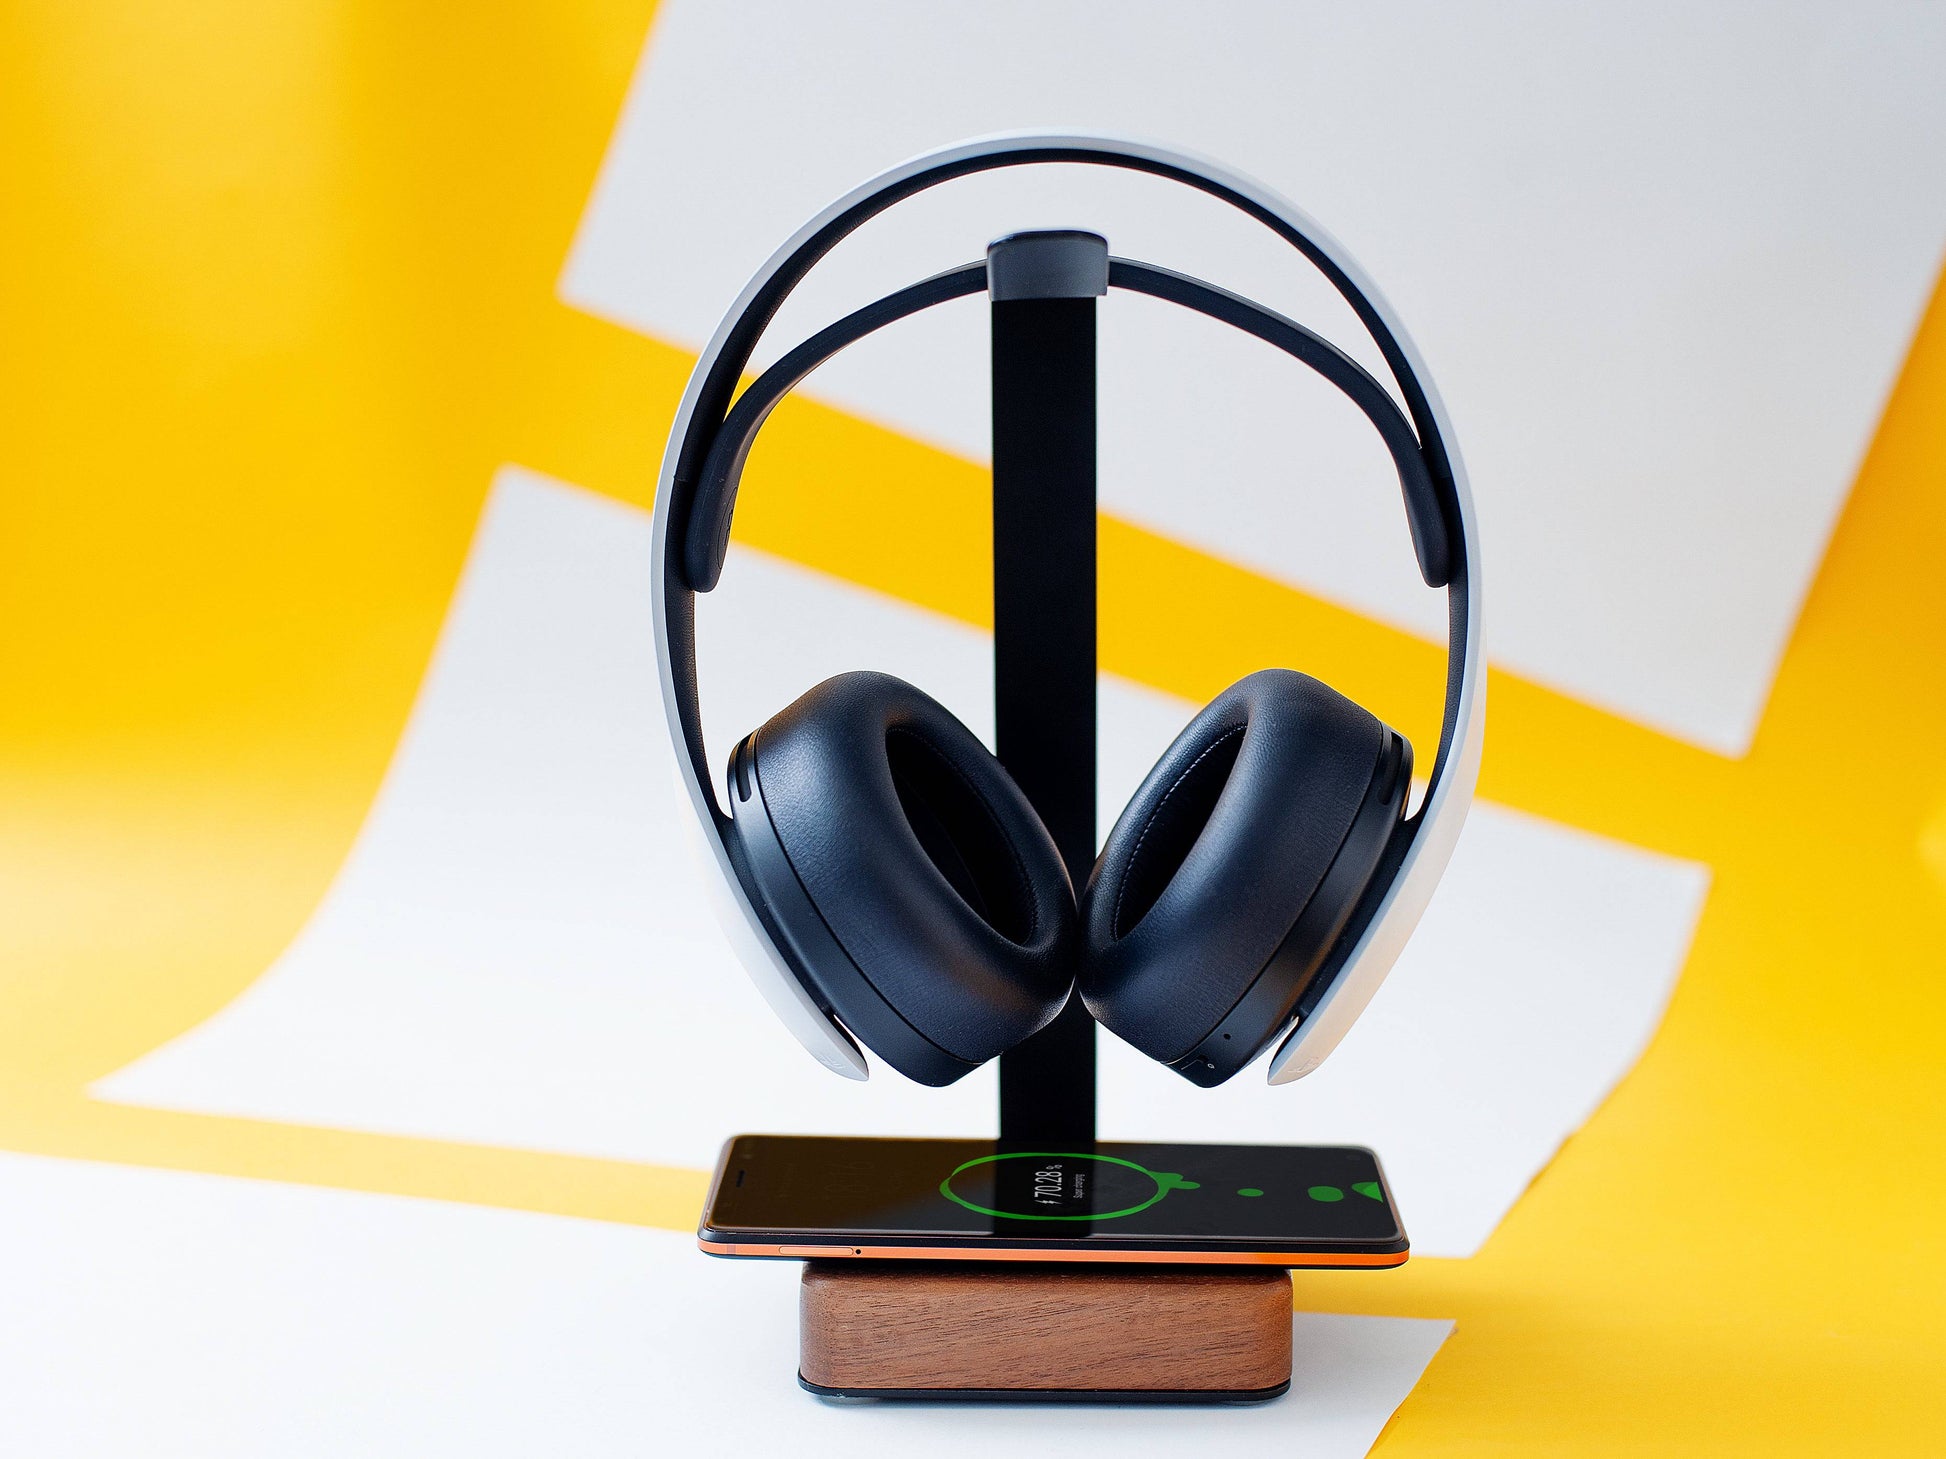 Wireless Charger Wood Headphone Stand: Stylish Desk Accessory